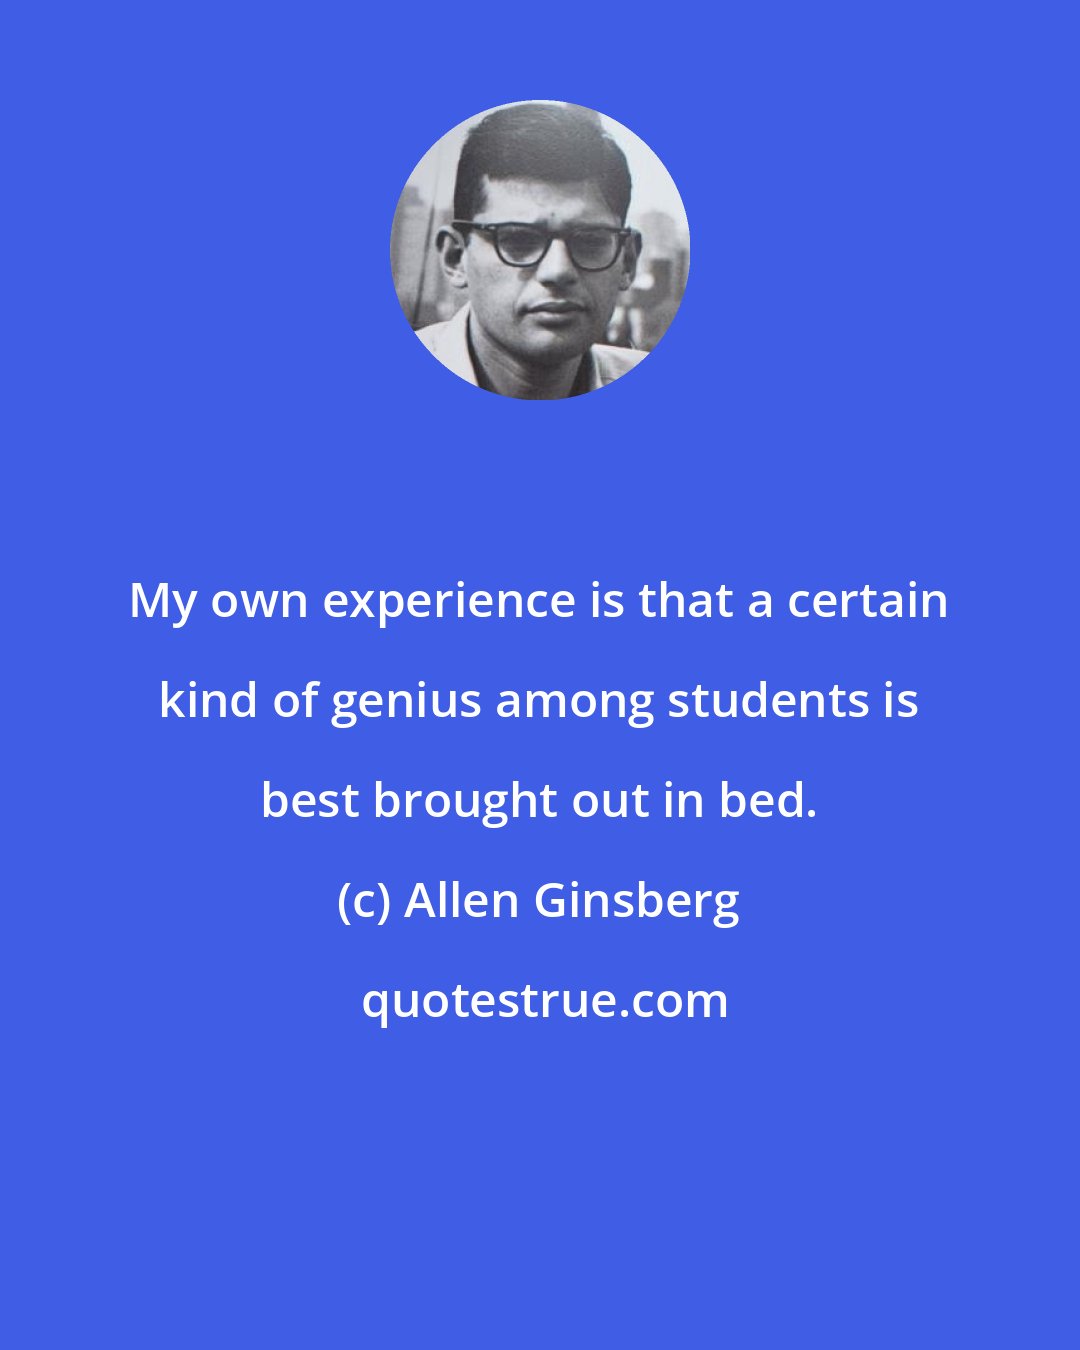 Allen Ginsberg: My own experience is that a certain kind of genius among students is best brought out in bed.